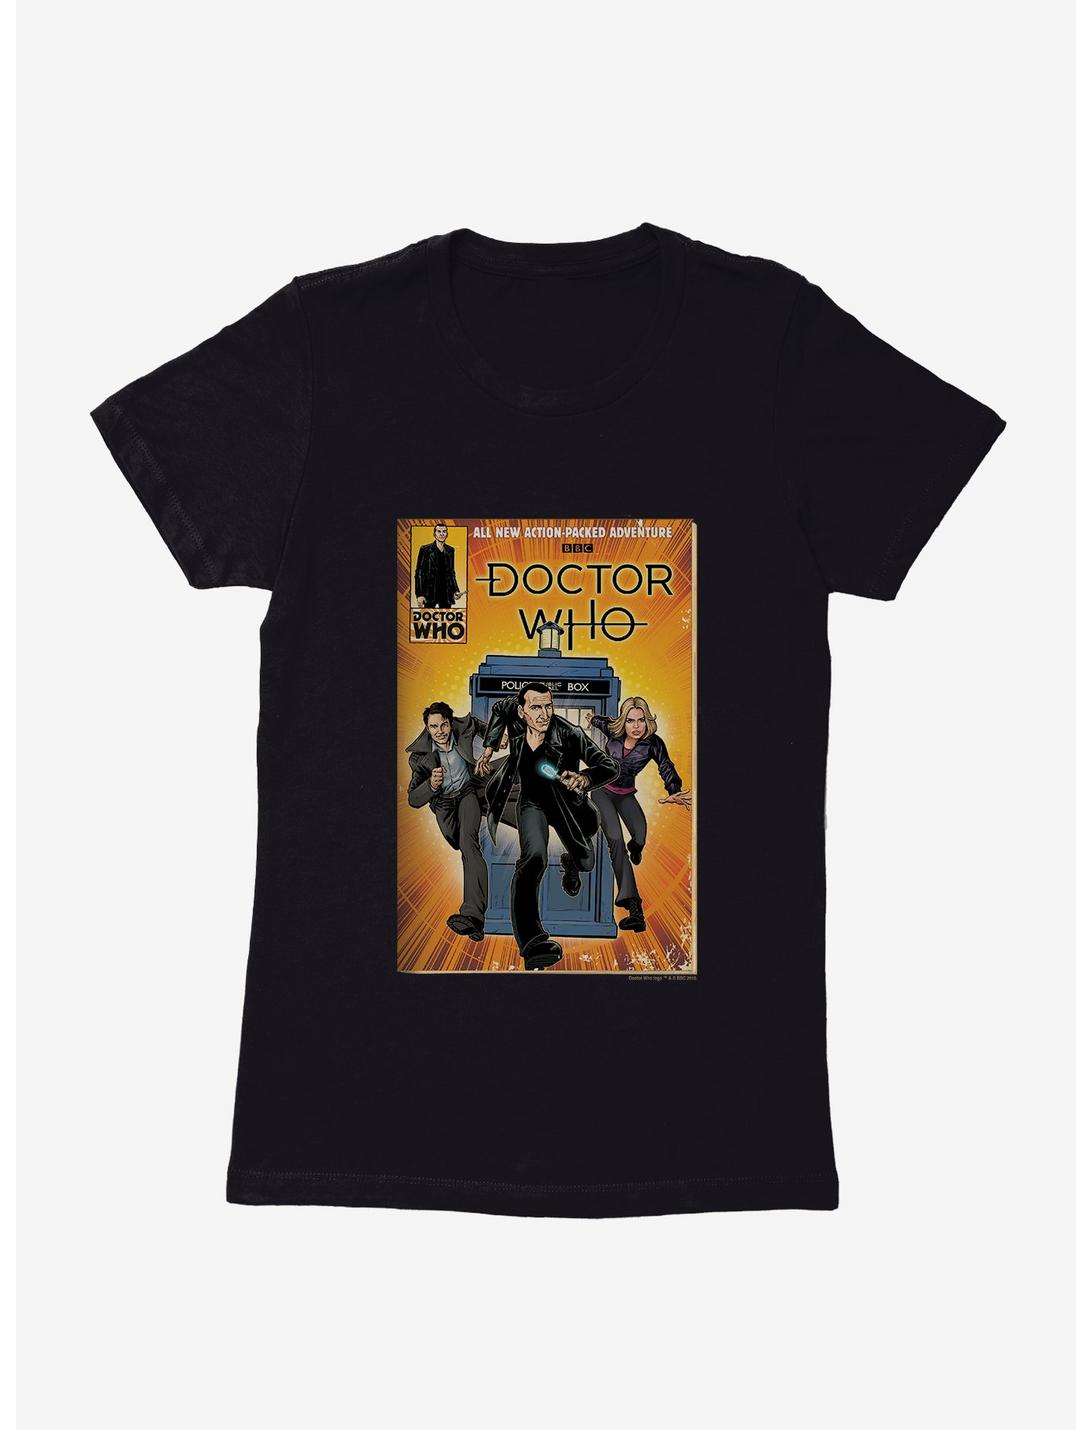 Doctor Who Action Packed Adventure Comic Womens T-Shirt, BLACK, hi-res